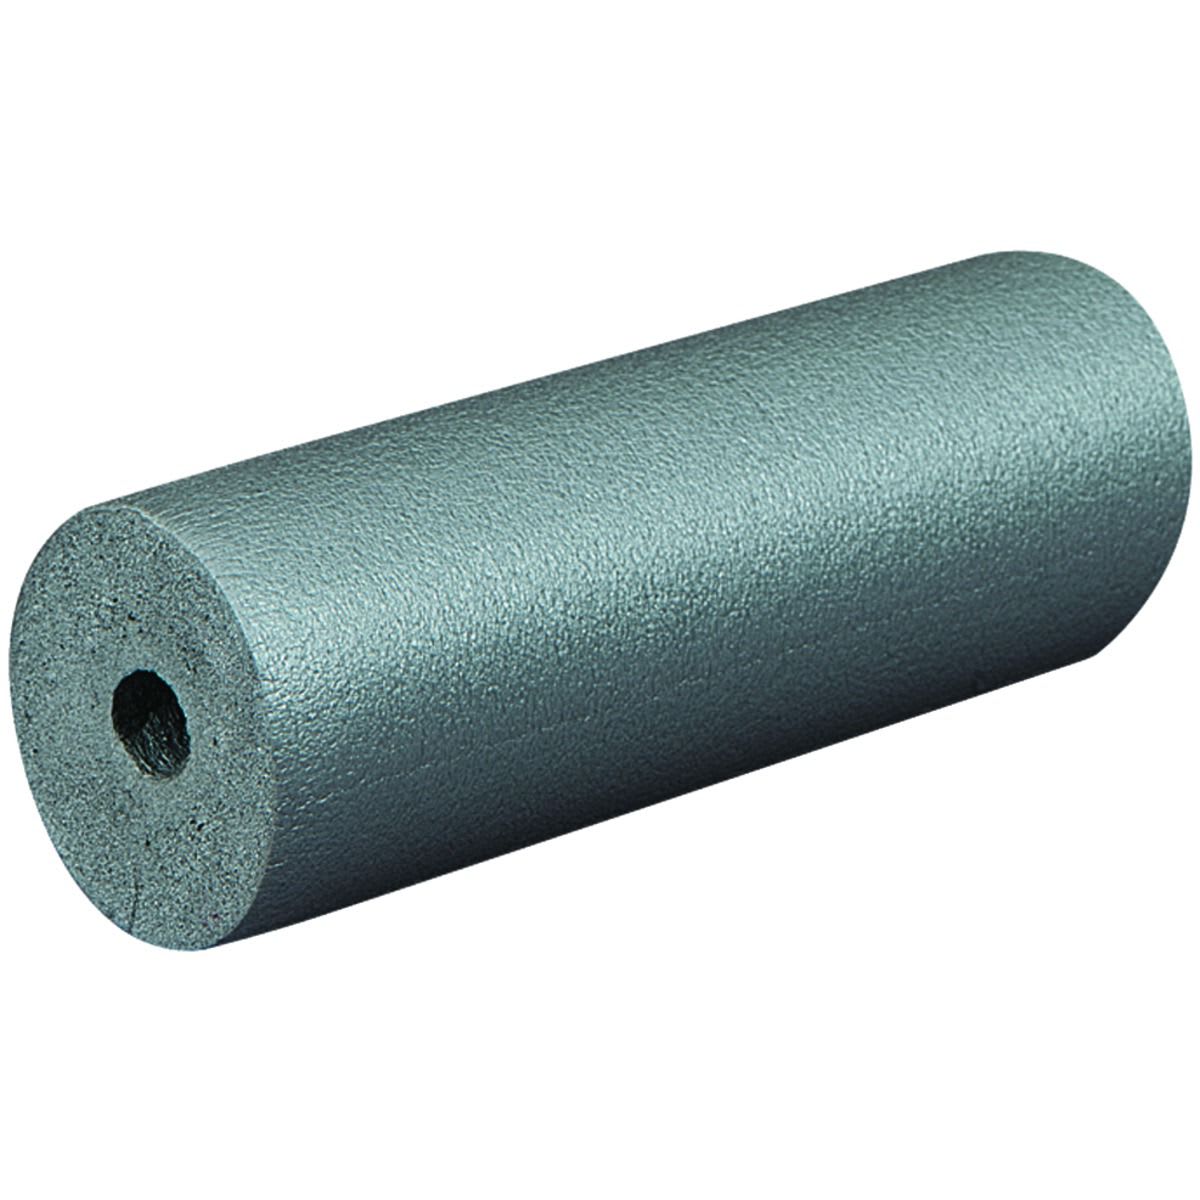 Wickes Pipe Insulation Byelaw 15 x 1000mm Pack